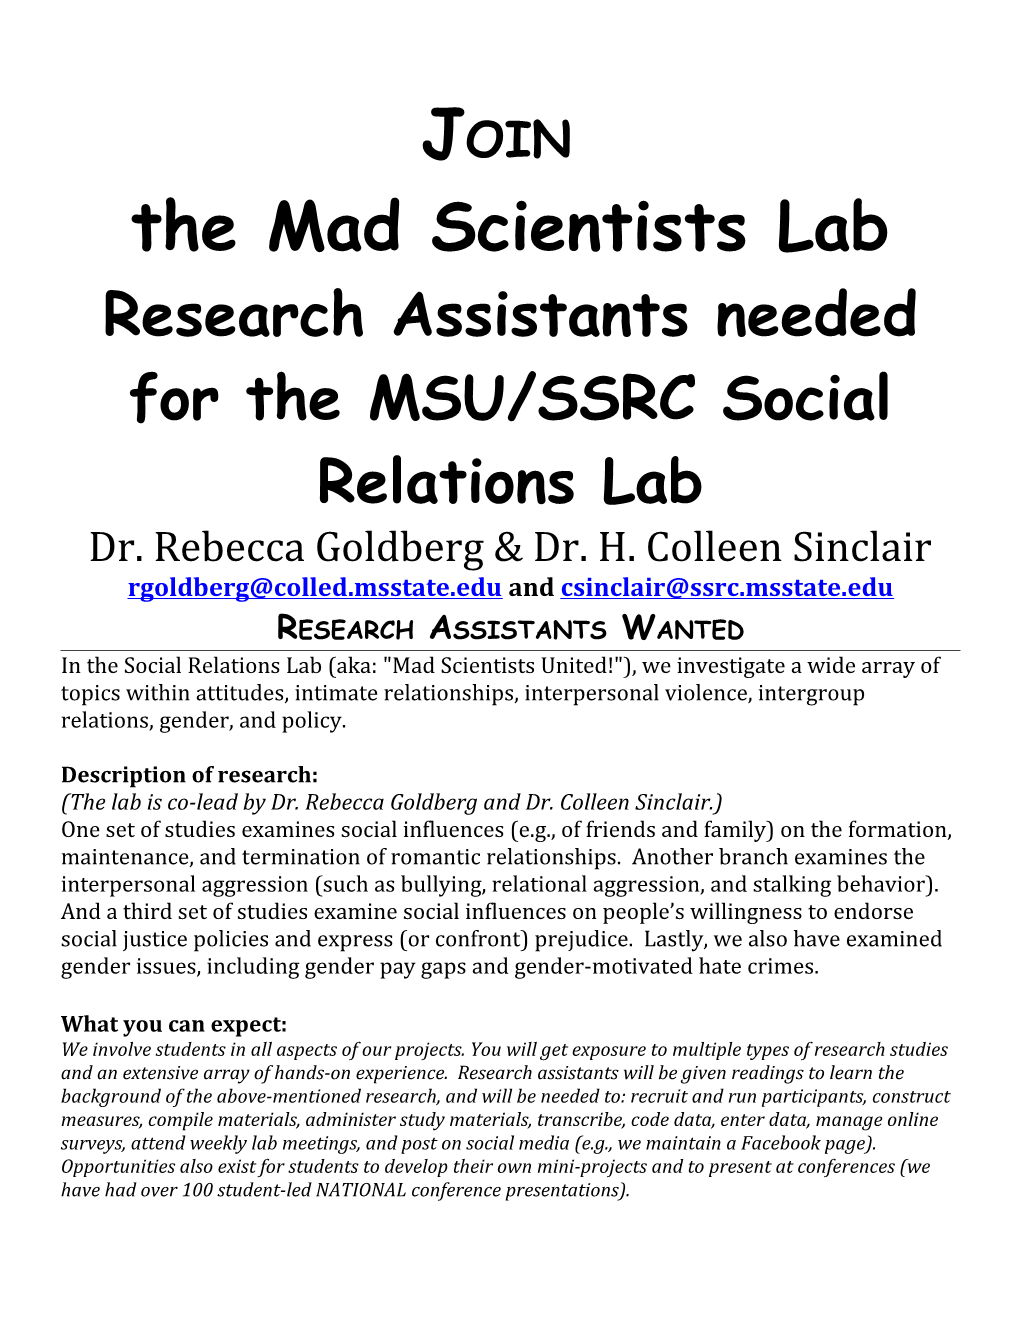 The Mad Scientists Lab